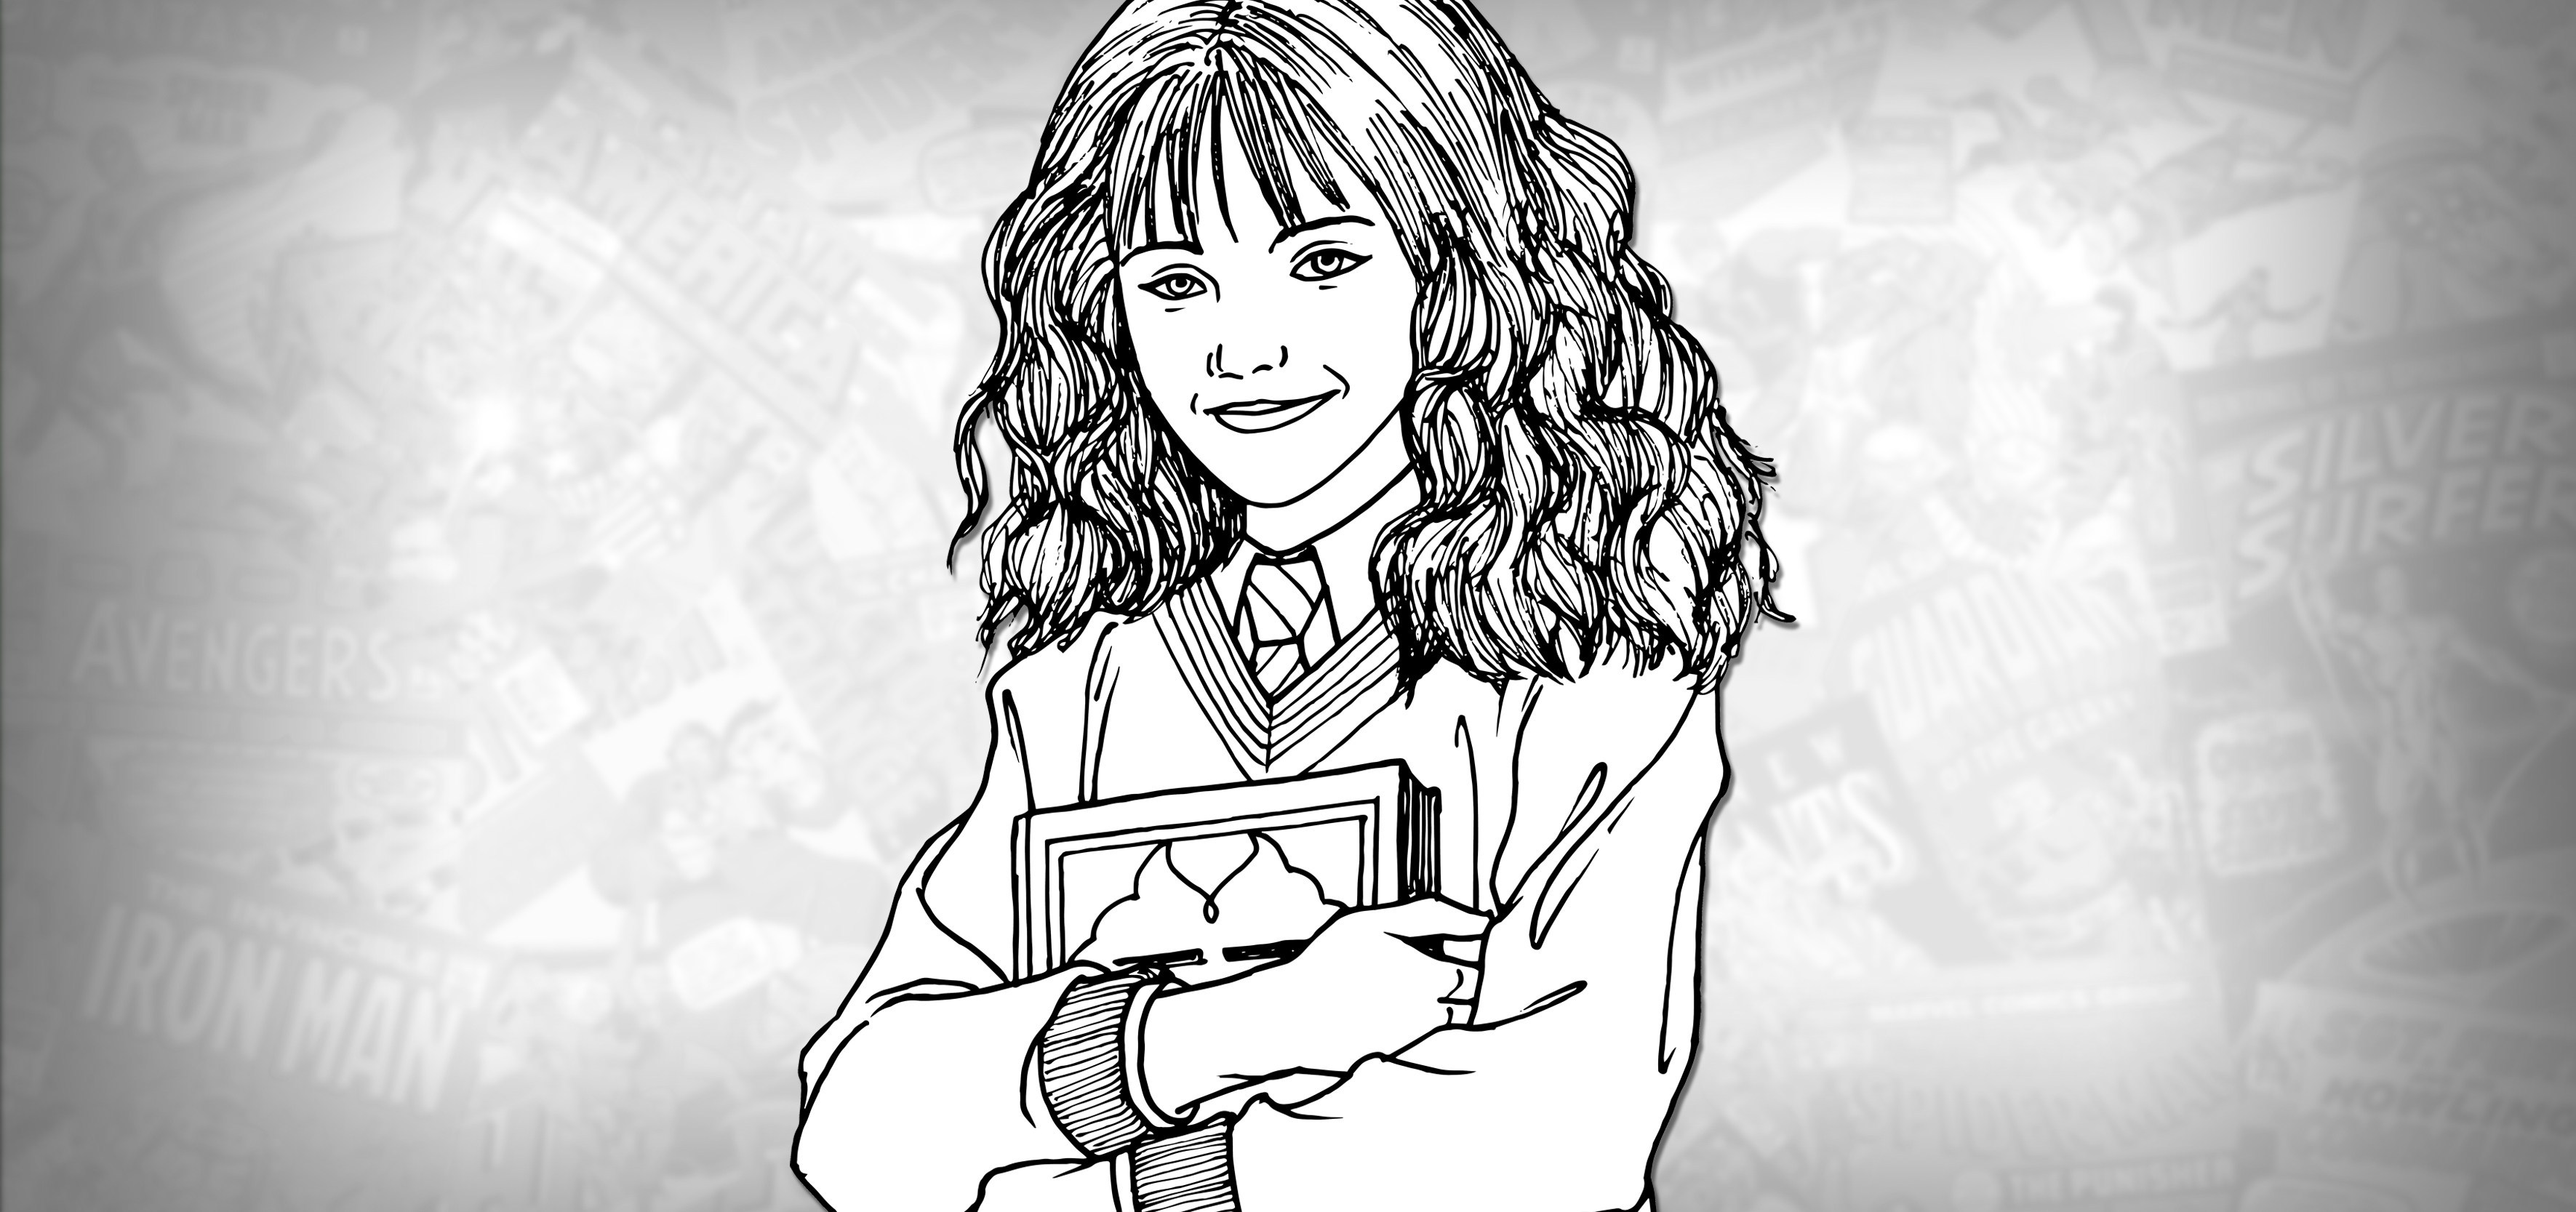 HERMIONE-GRANGER-THUMB-WEBSITE-2 How to draw Harry Potter characters (Drawing ideas and tutorials)